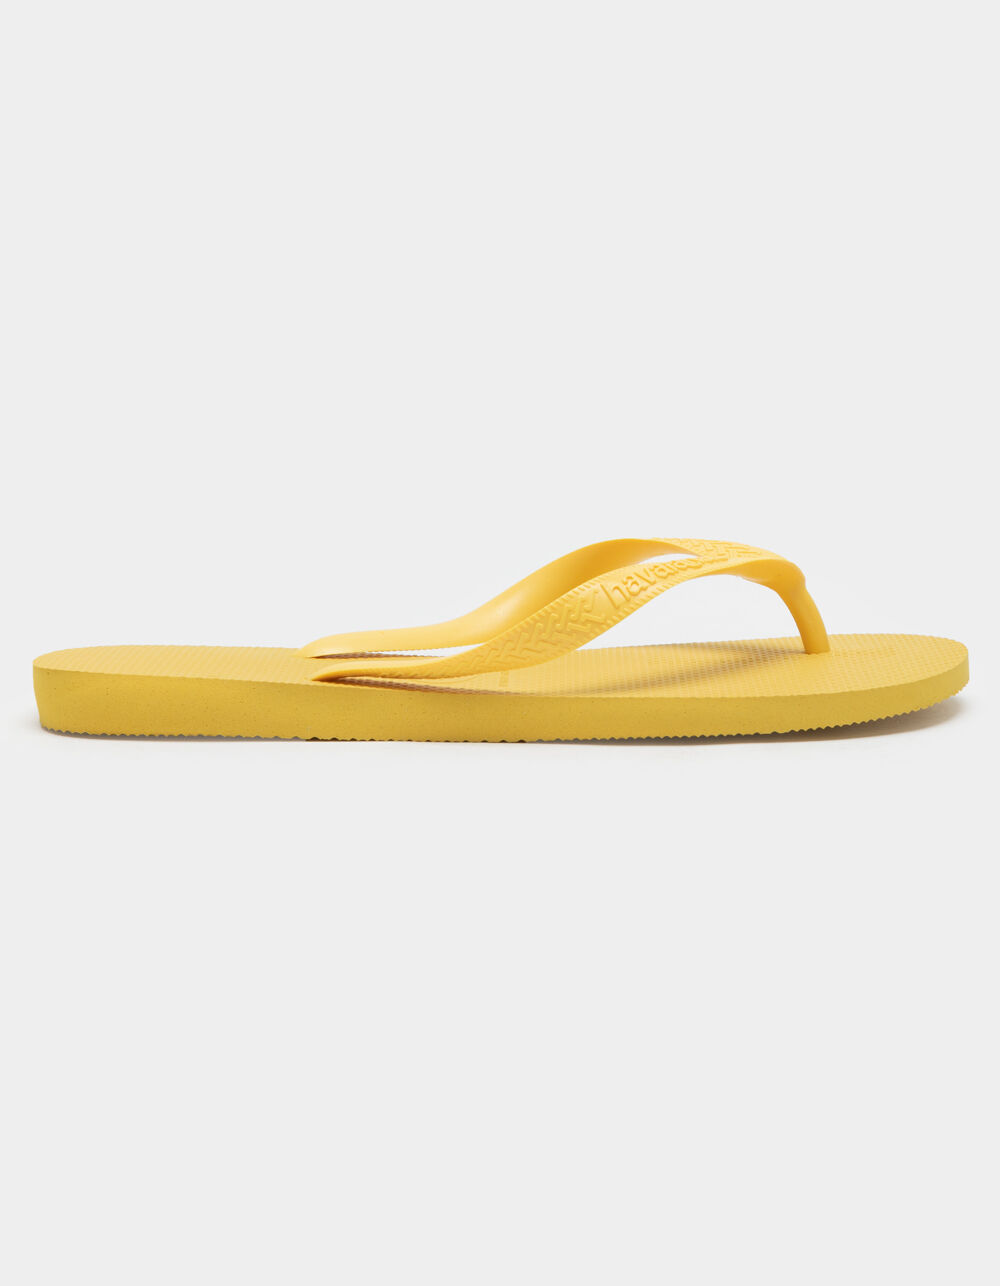 HAVAIANAS Top Womens Yellow Sandals - YELLOW | Tillys